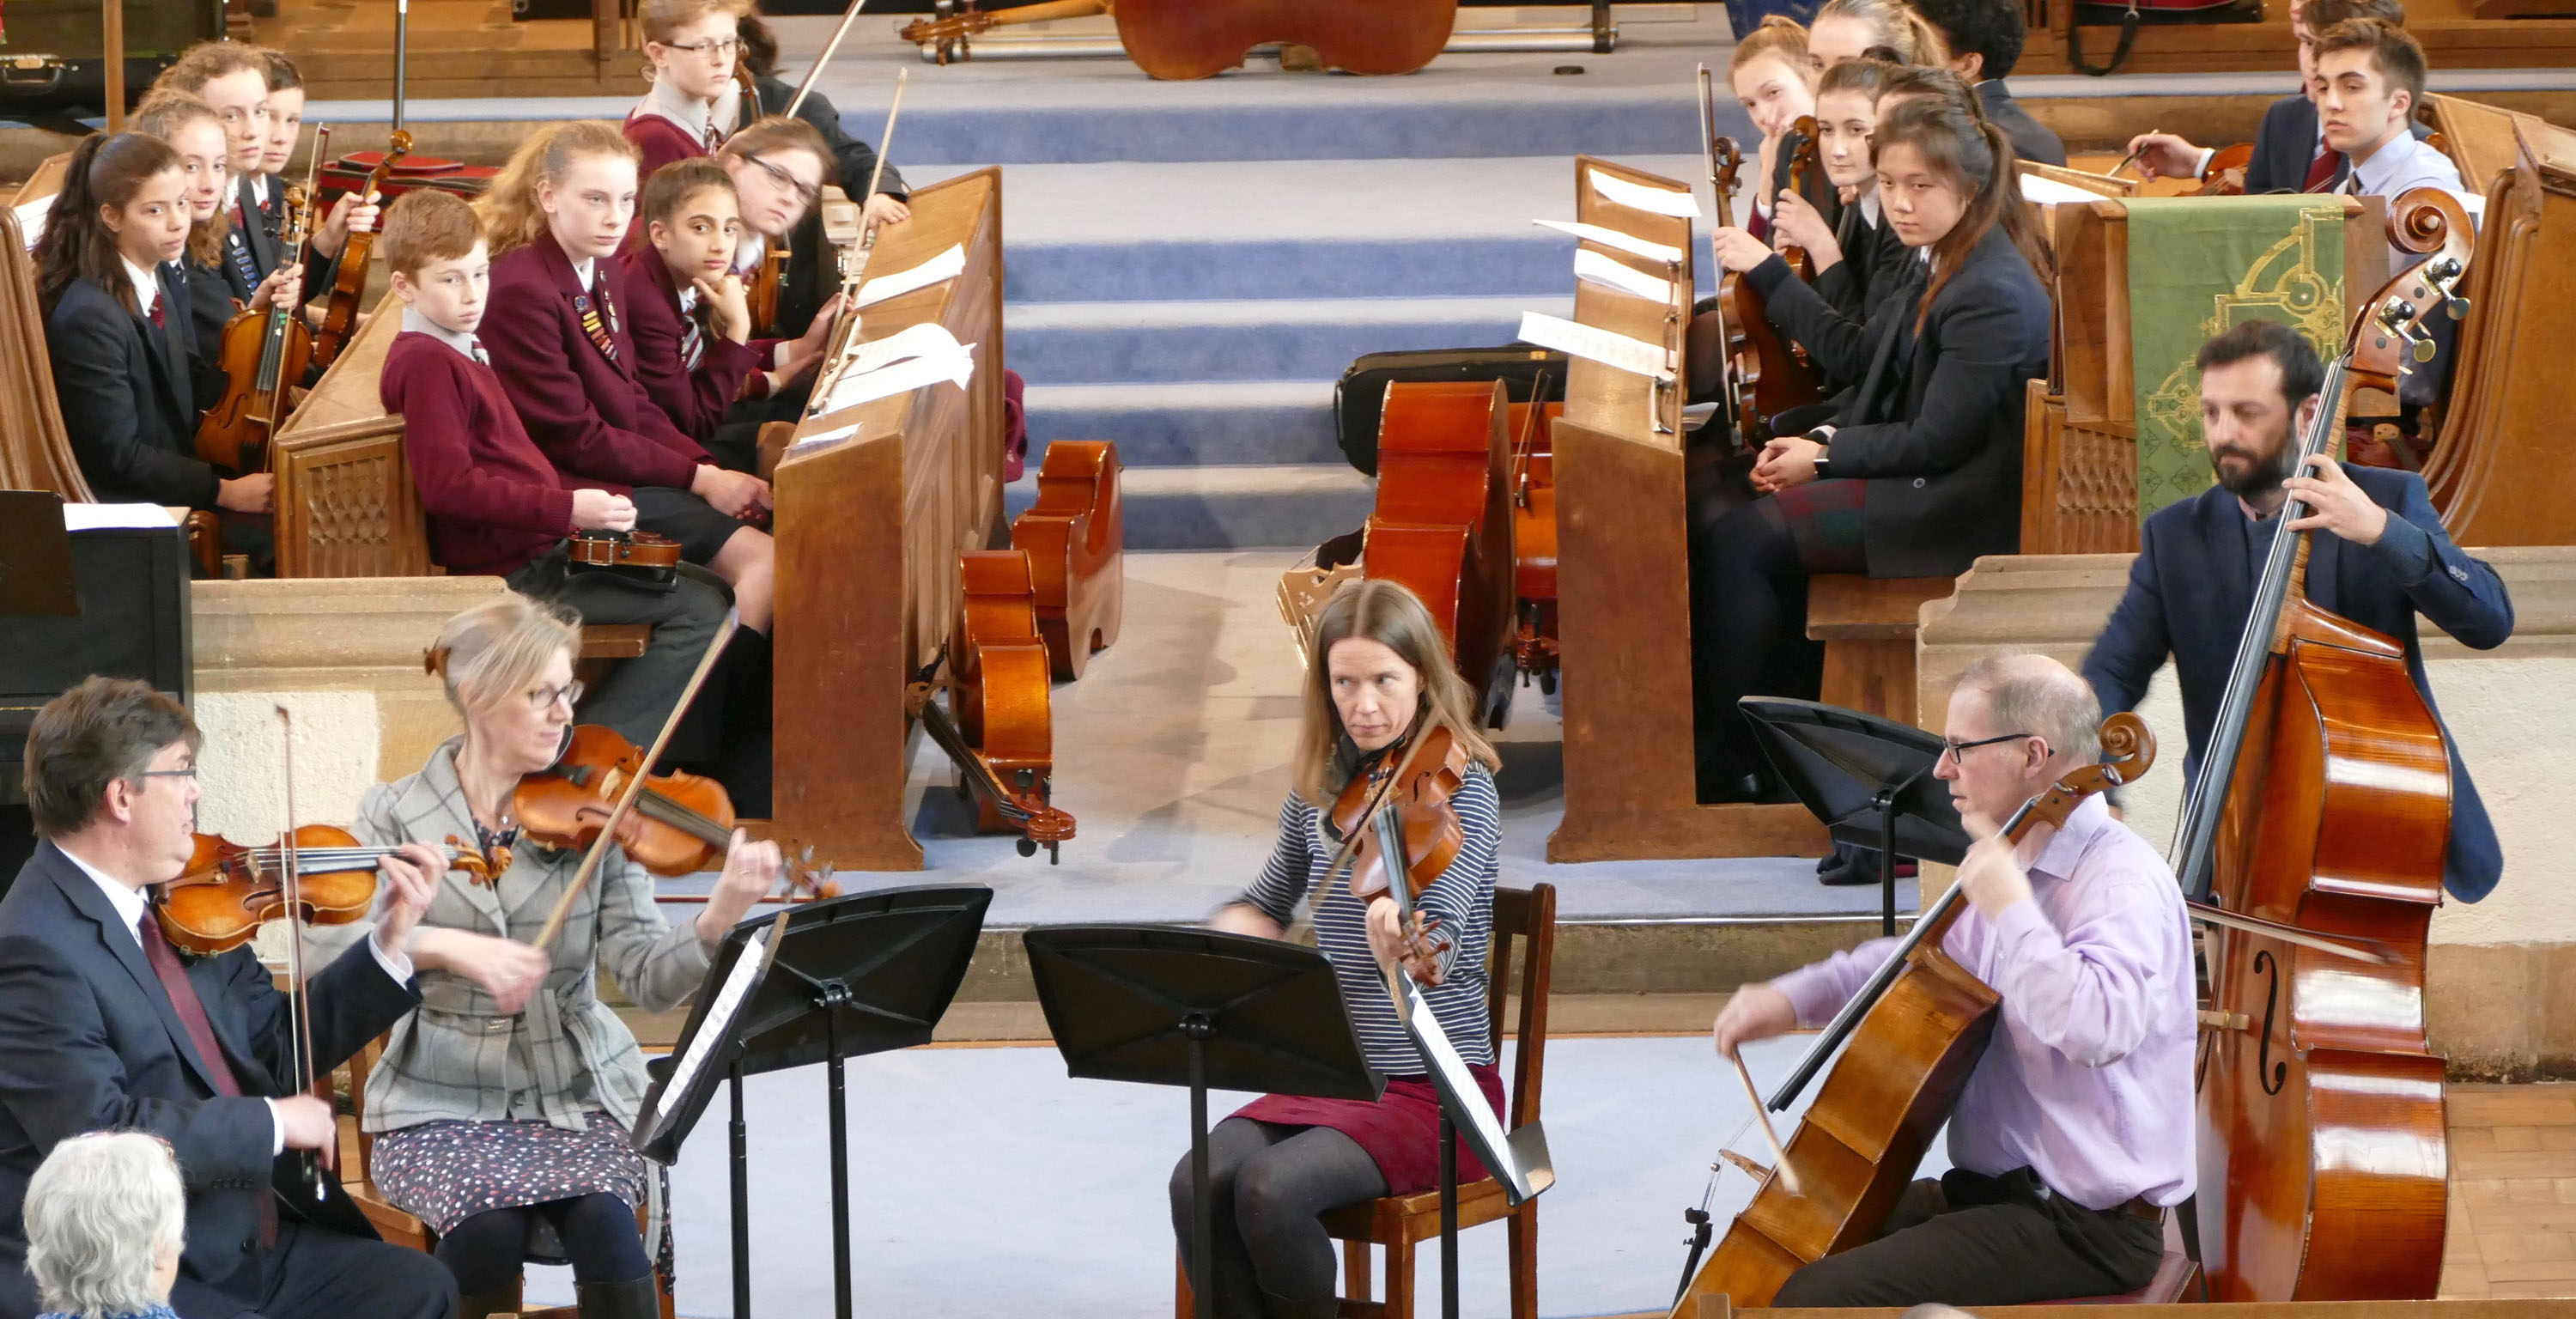 Chamber Music Concert with Bromsgrove and Winterfold pupils, 24th February 2017